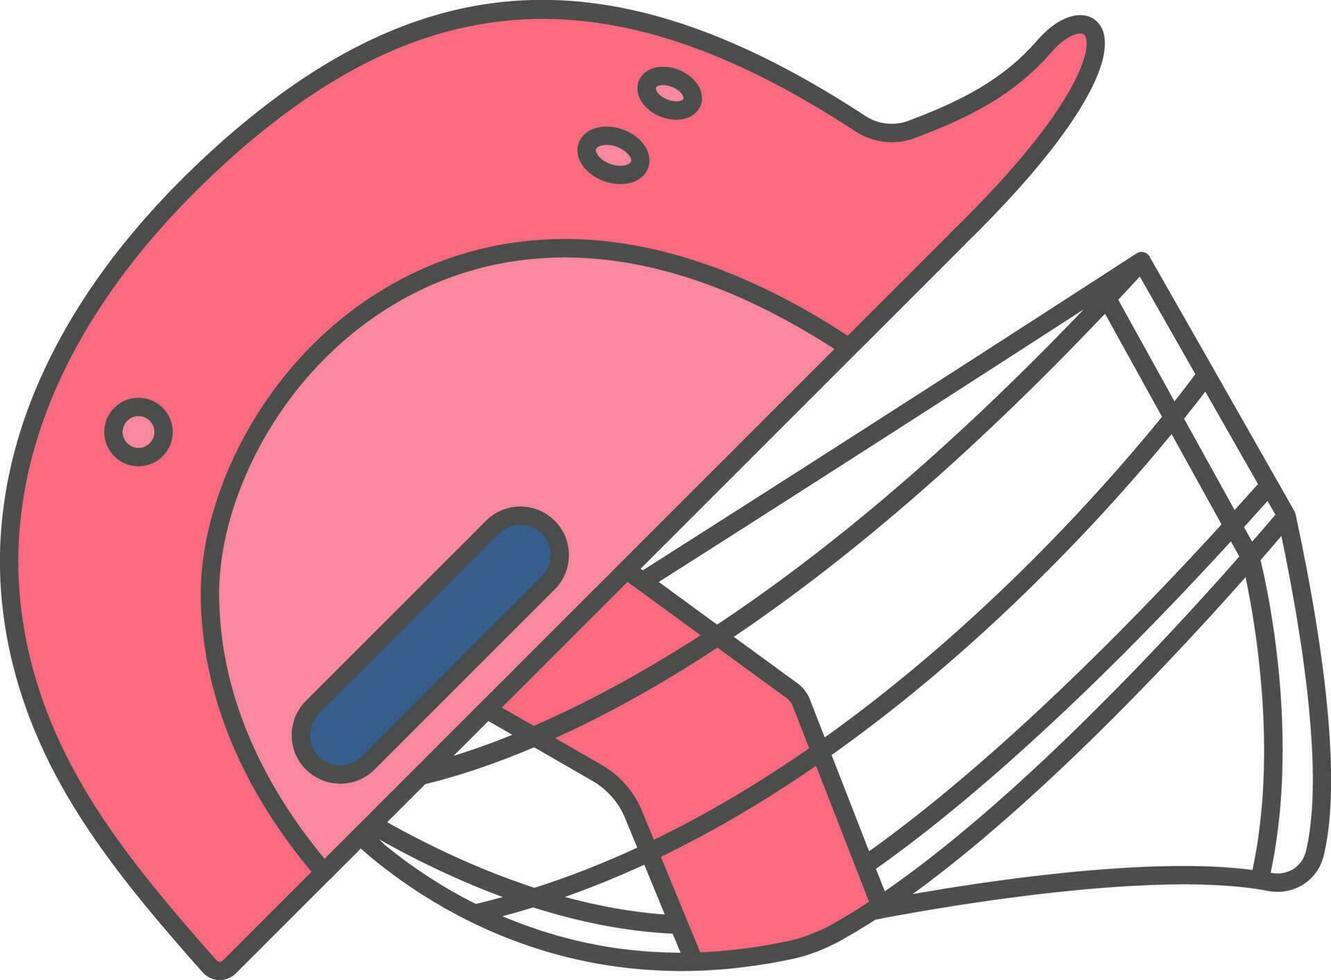 Cricket Helmet Icon In Pink And Blue Color. vector